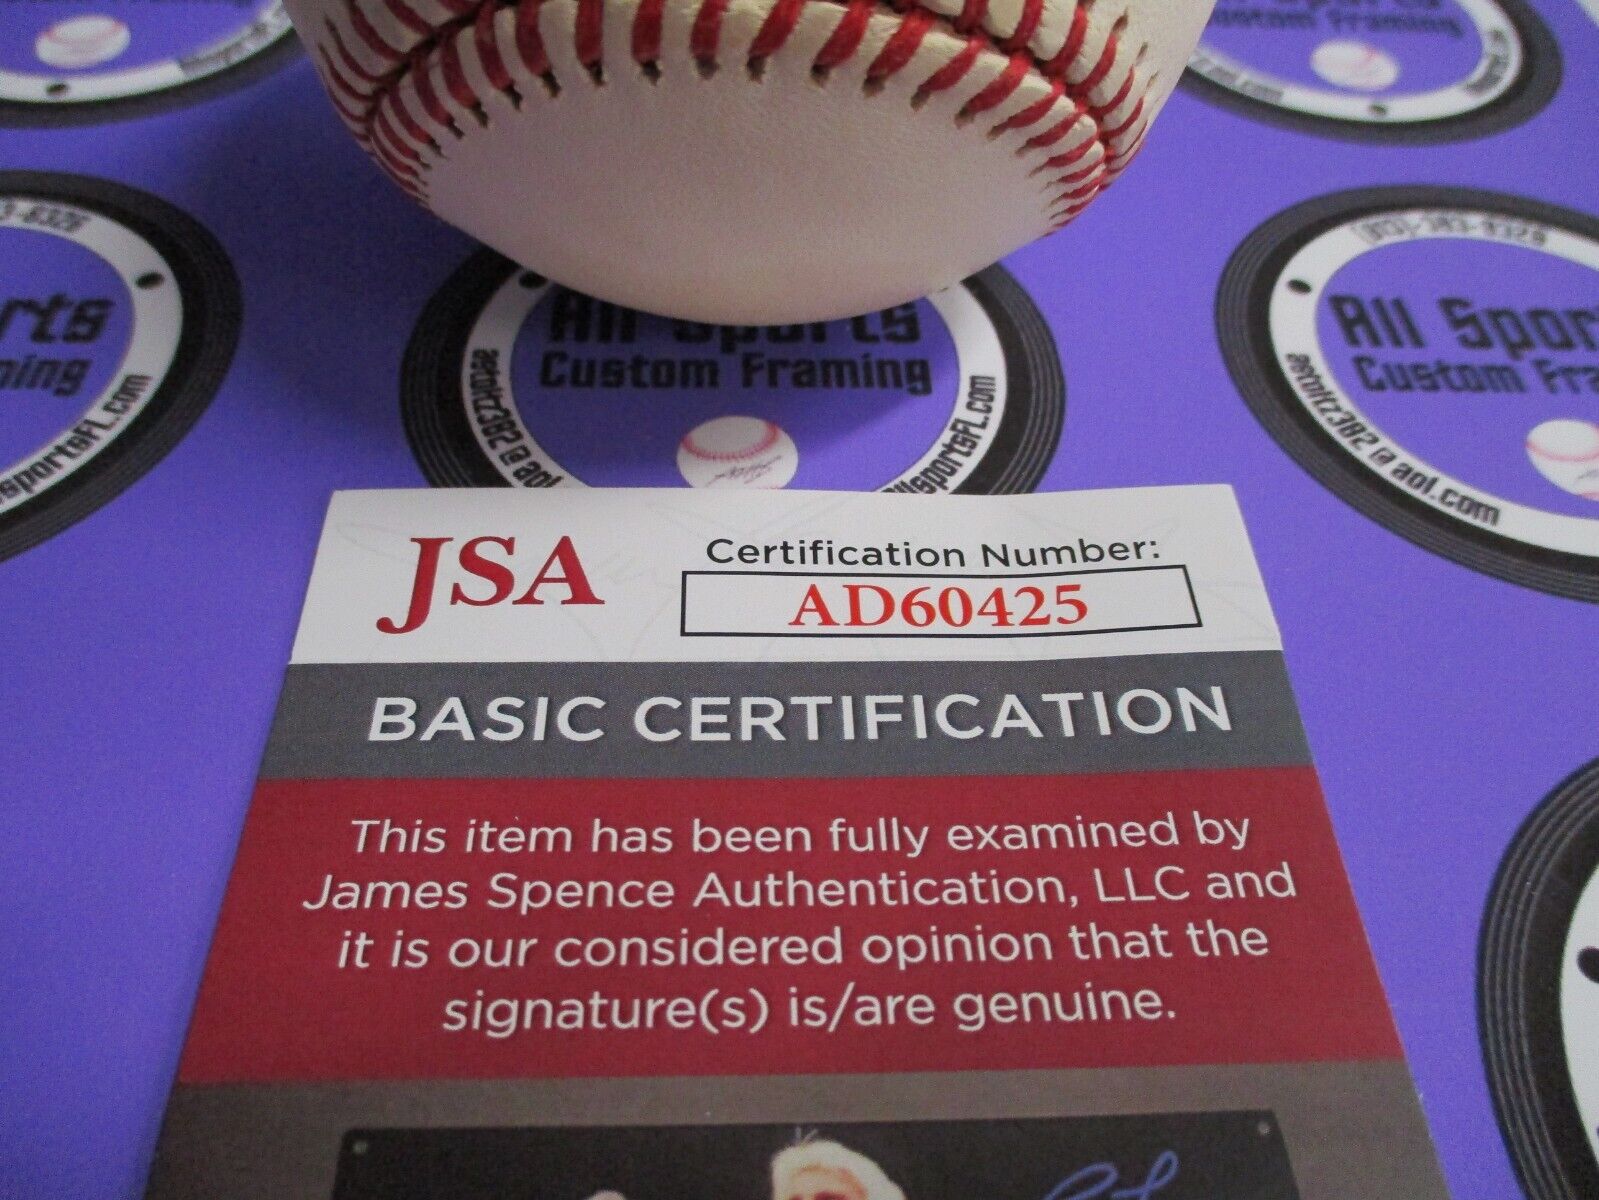 Harmon Killebrew Autographed Baseball Authenticated by JSA #AD60425